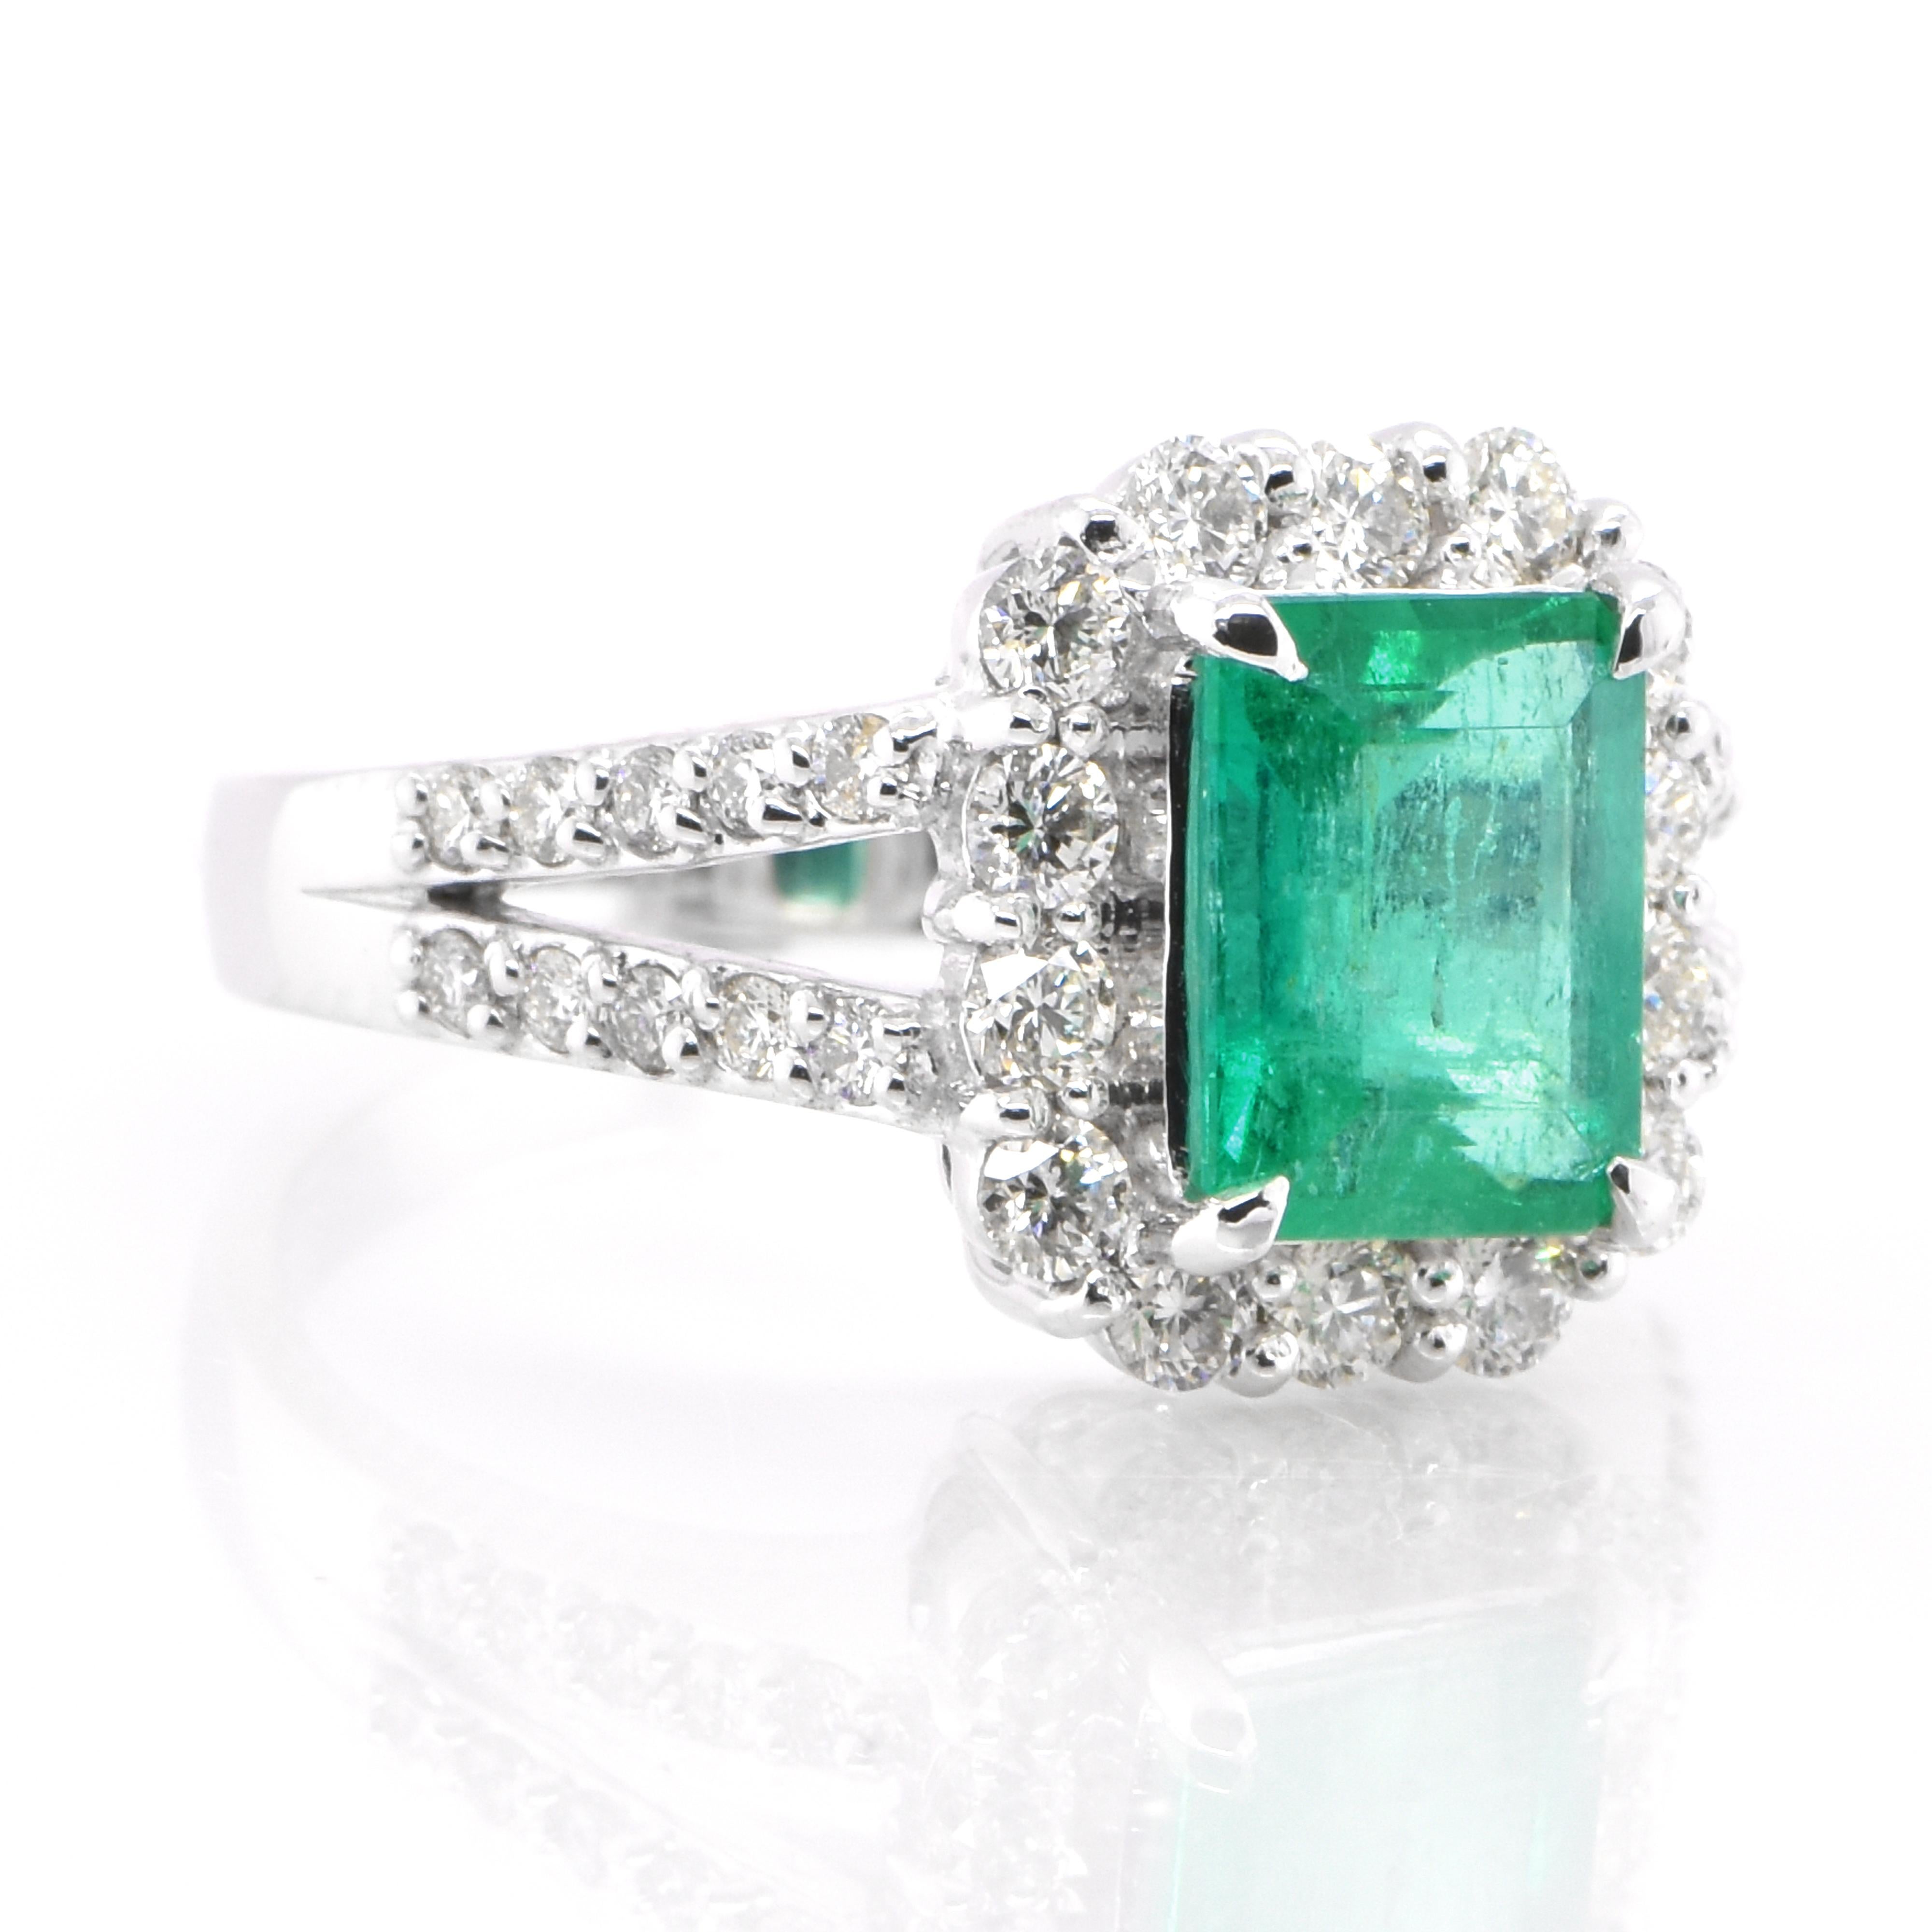 Modern 1.64 Carat Natural Emerald and Diamond Halo Ring Set in Platinum For Sale